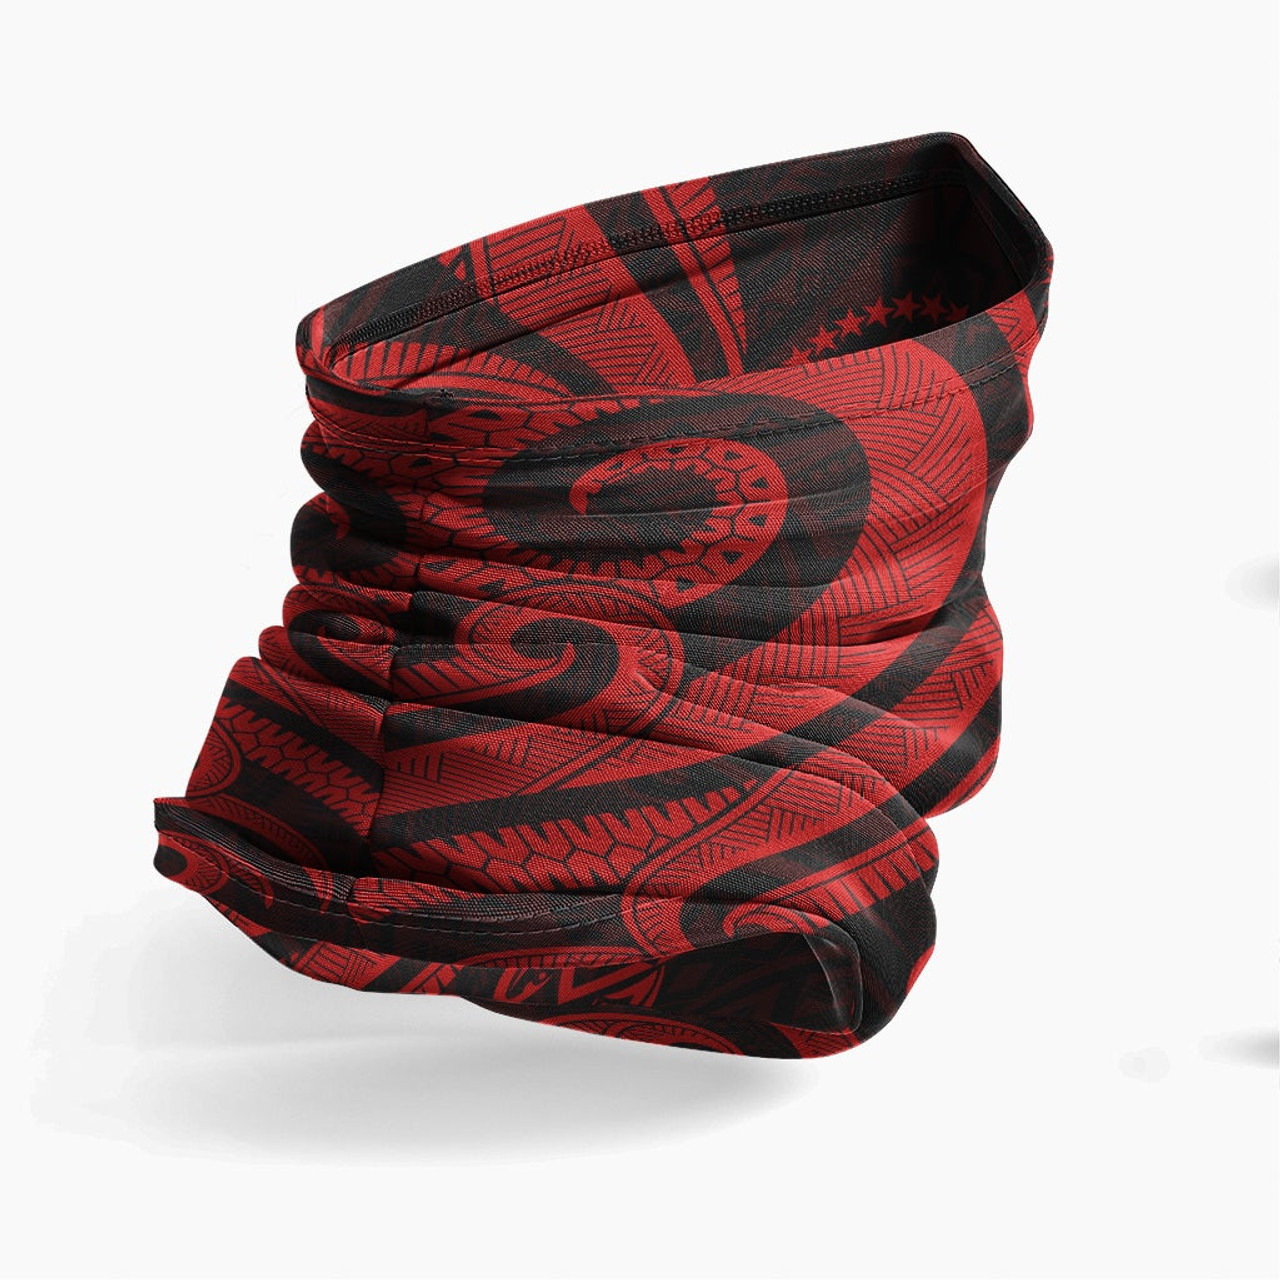 Chuuk Neck Gaiter - Turtle Tentacle Red 3